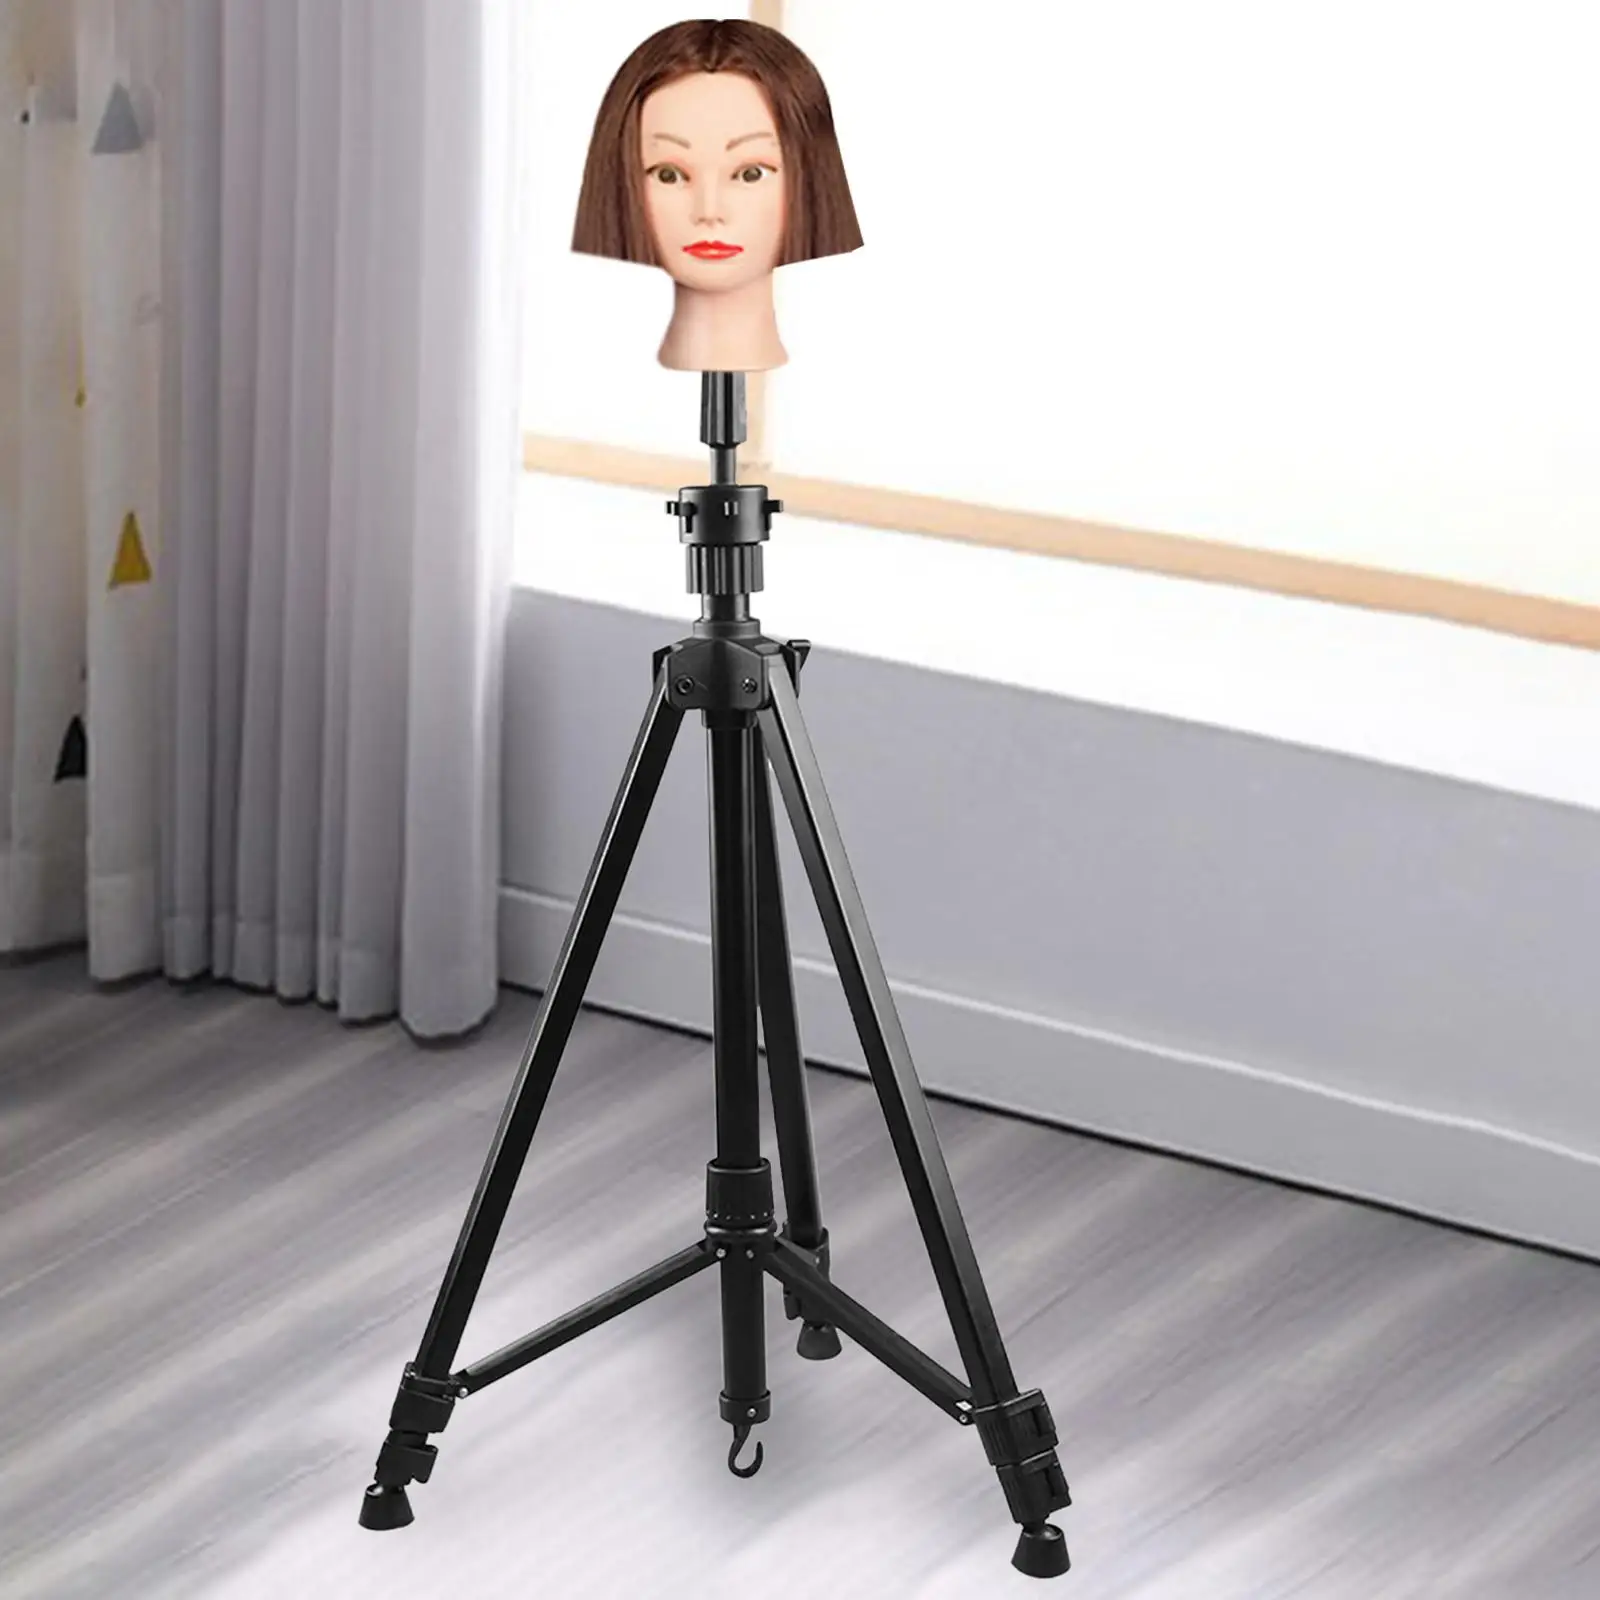 Wig Head Stand Tripod Multifunction Stand Manikin Head Tripod Adjustable Foldable Stand Mannequin Tripod for Cosmetology Salons